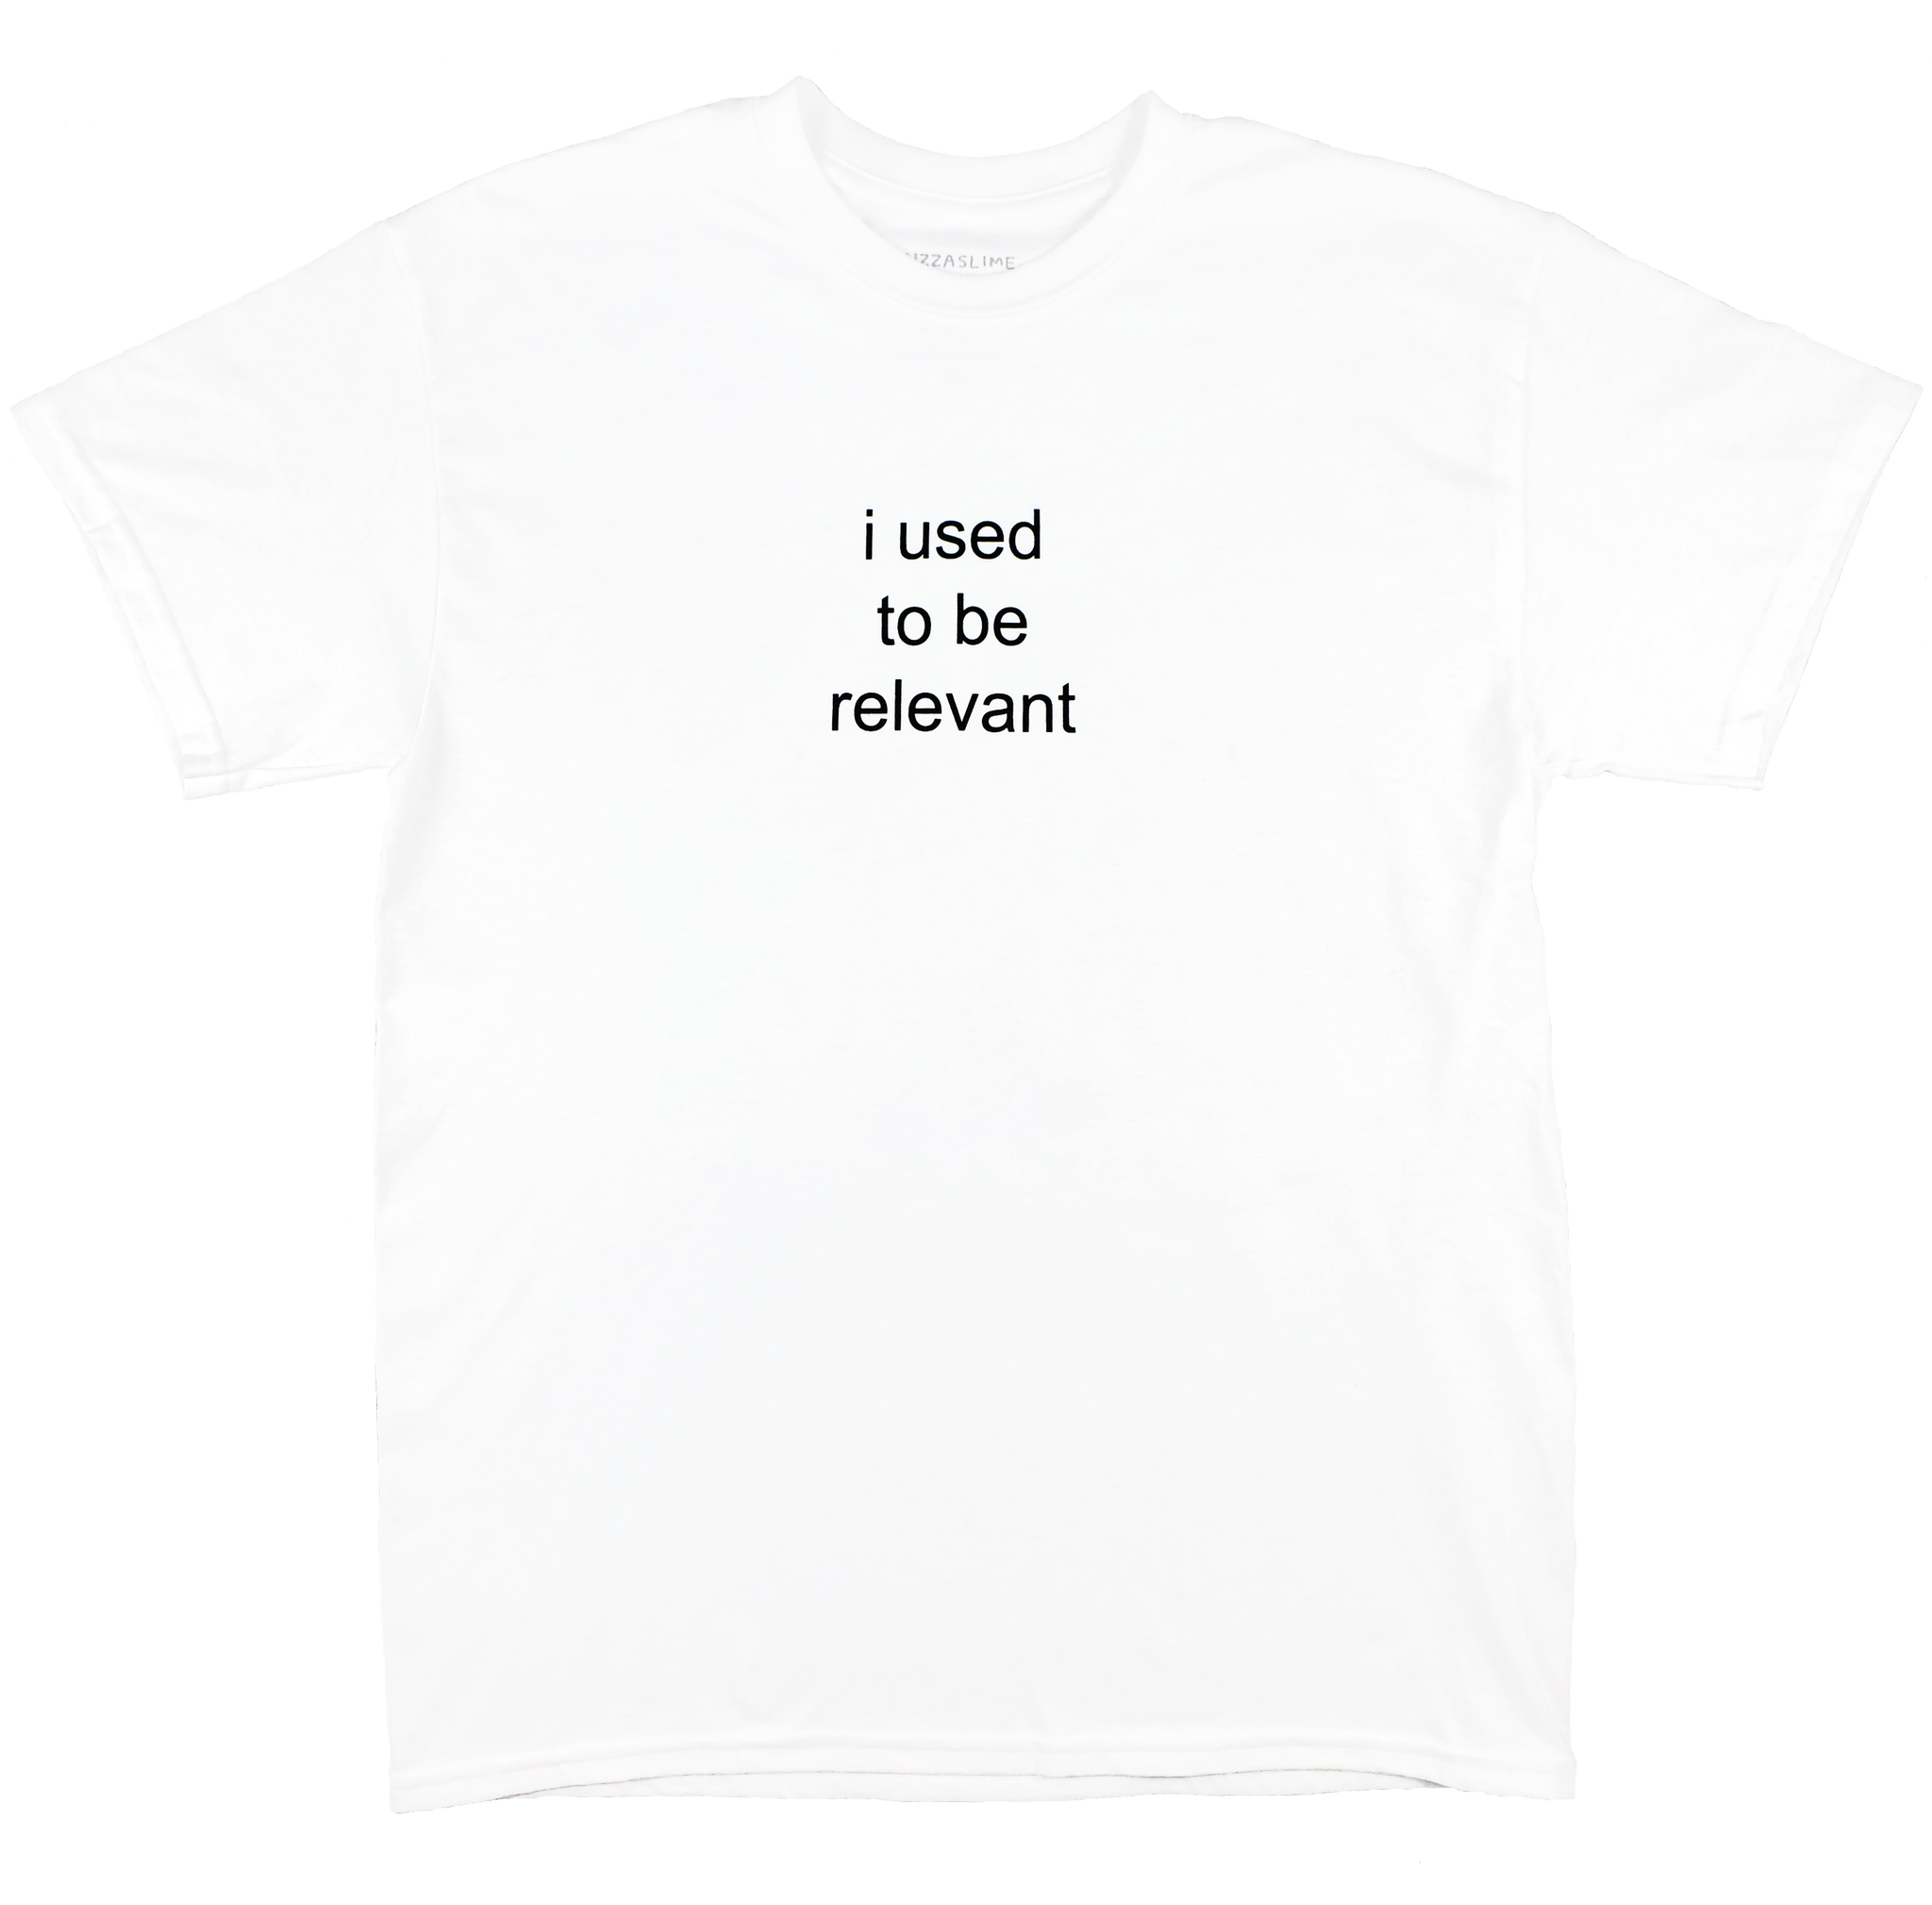 I USED TO BE RELEVANT T-SHIRT (WHITE)